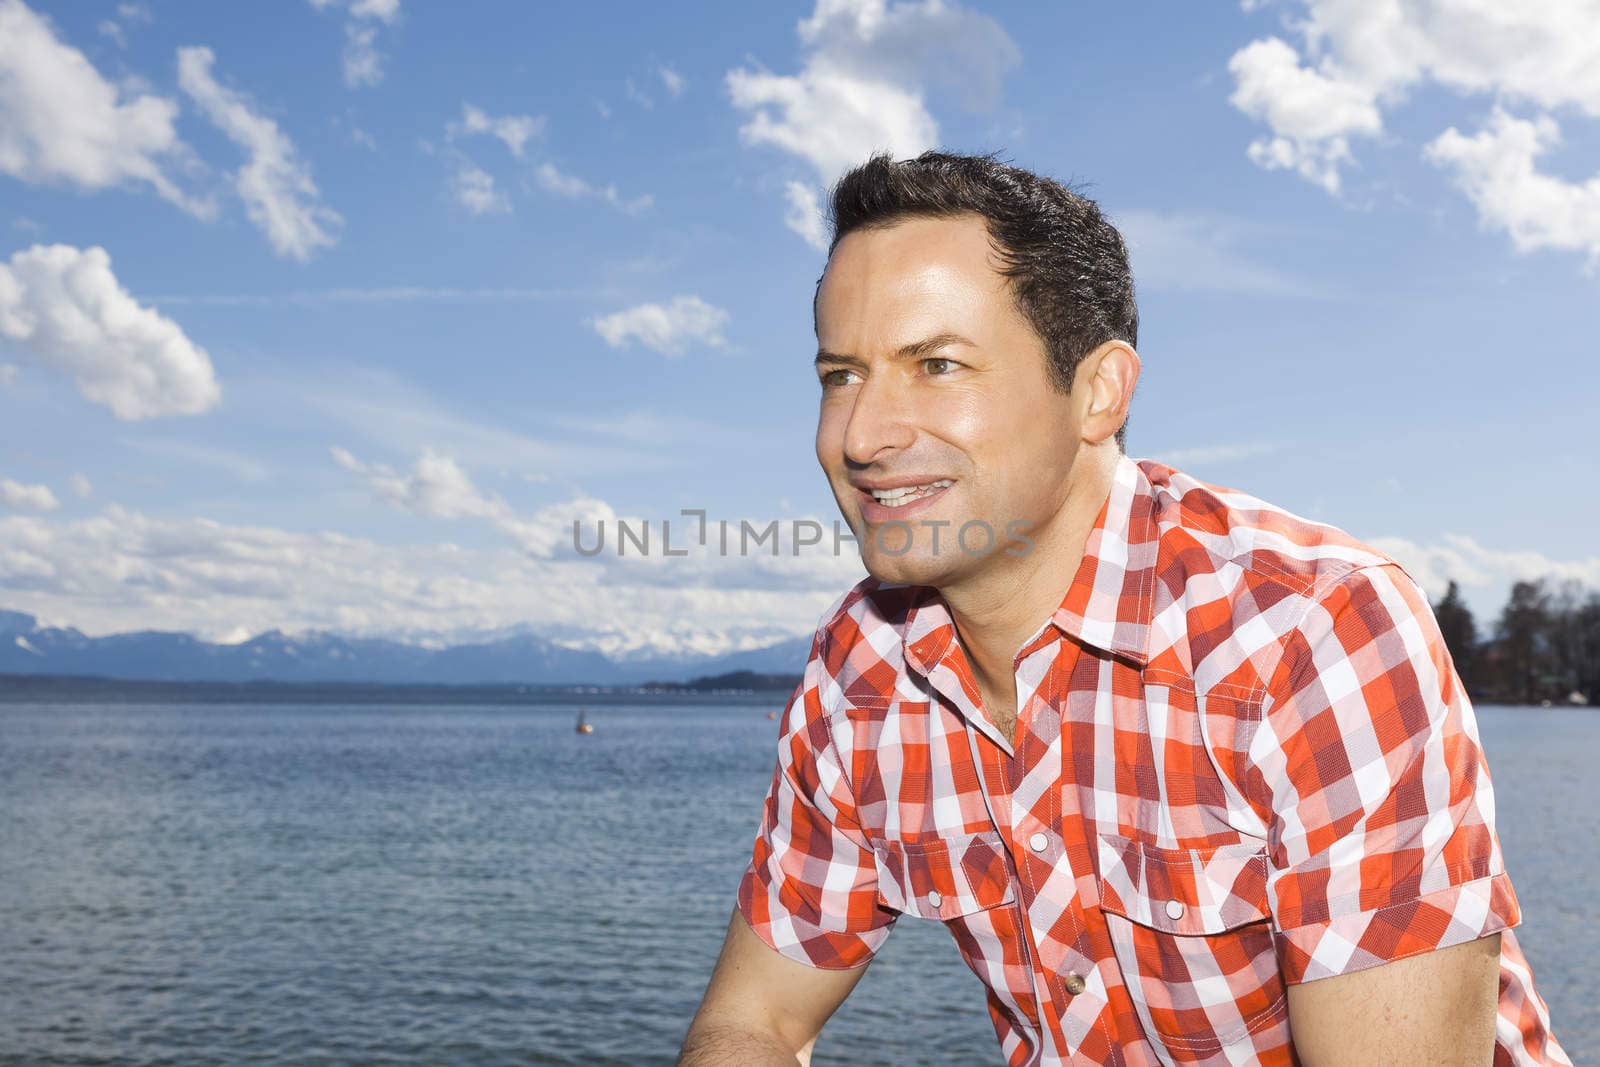 An image of a handsome man at the lake